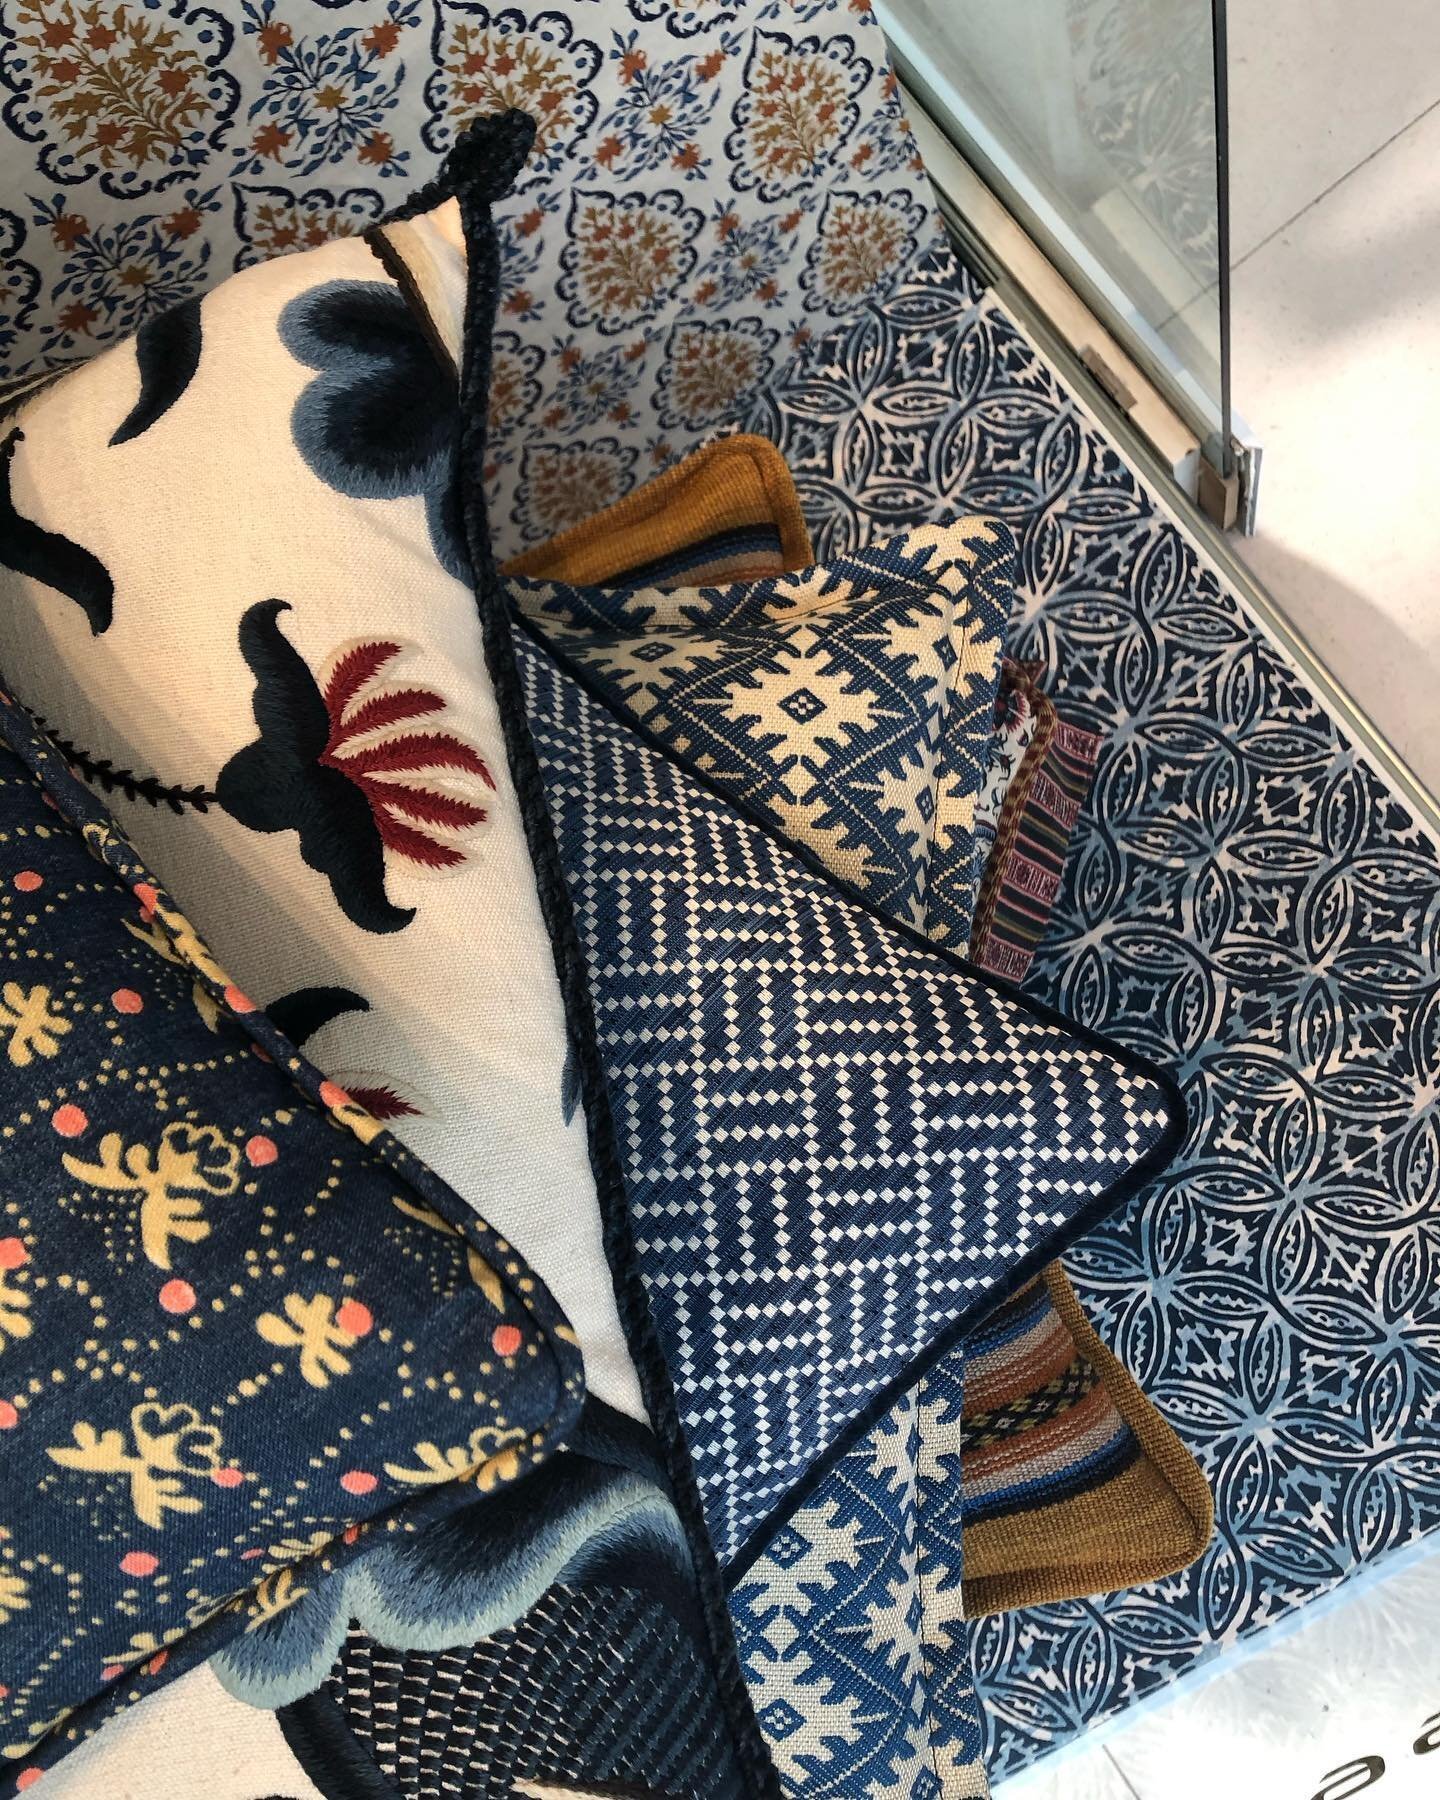 Fabrics from the fabulous @tissusdhelenelondon 🪡 Fabrics kindly donated by Tissus are among those featuring at Stitch and Bitch this Saturday (ticket link in bio). Remember - all proceeds from the event go to @superpoweragency, a creative youth orga